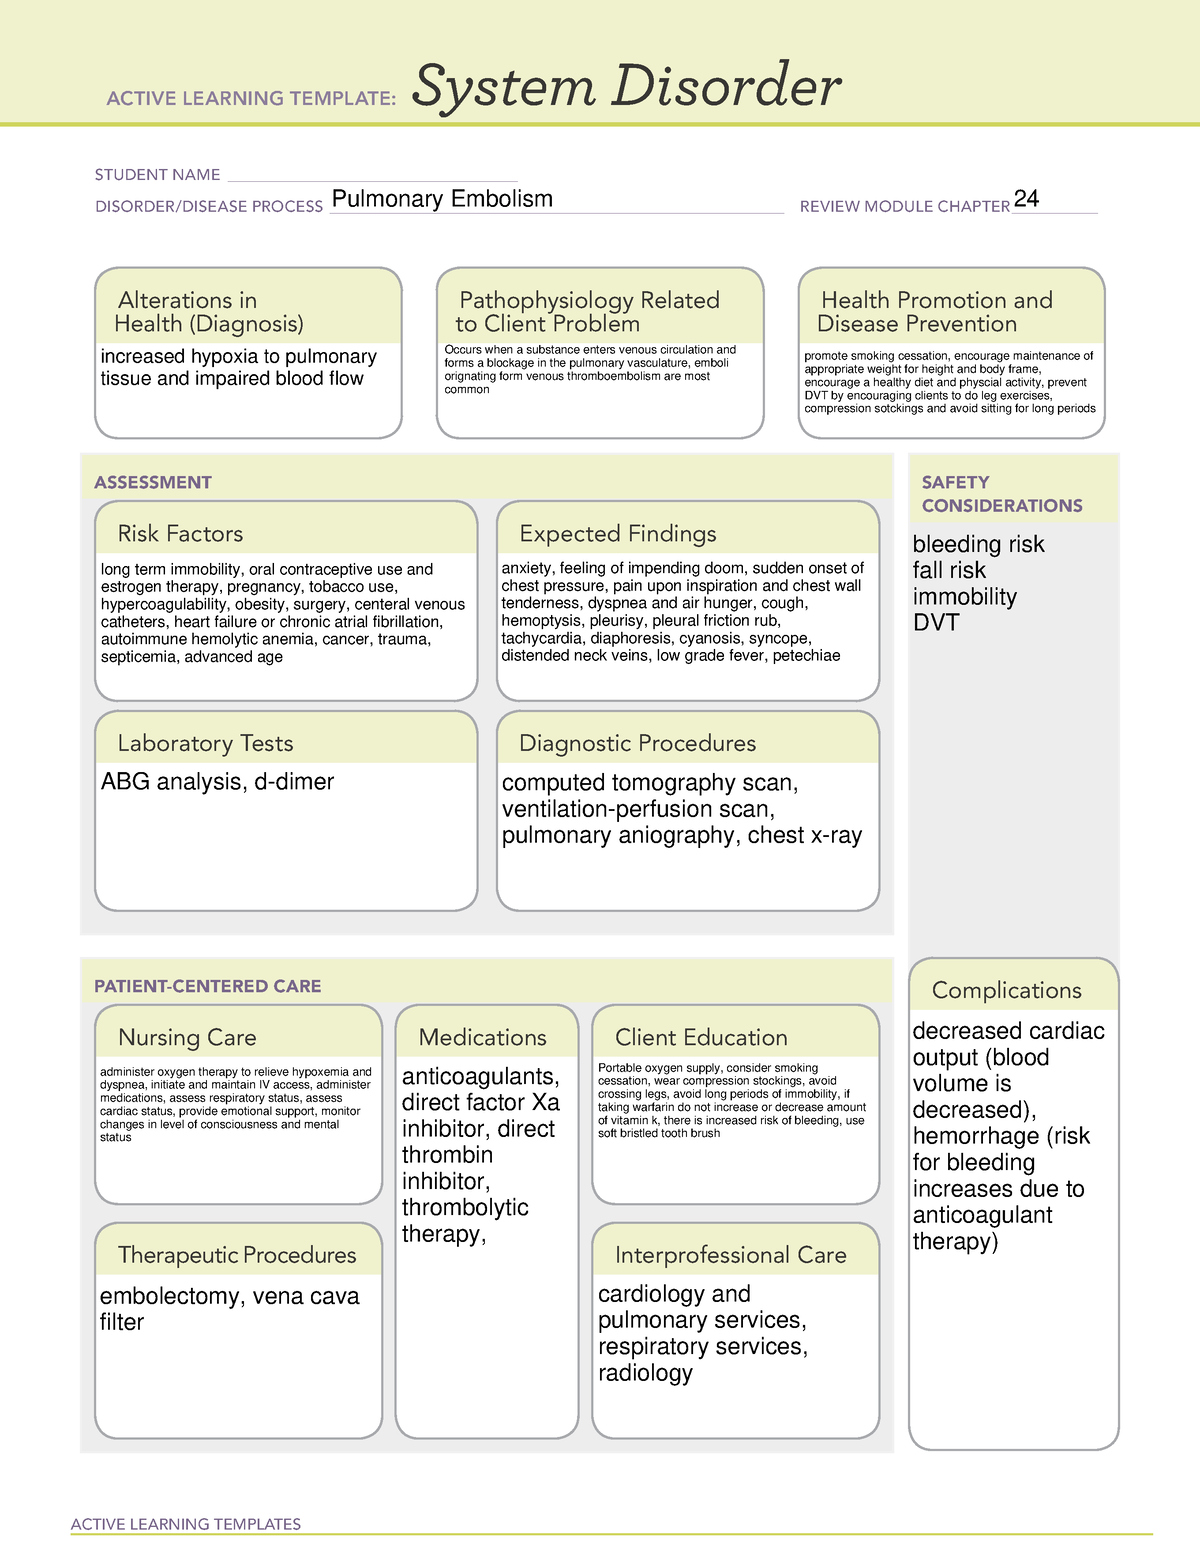 Pulmonary Embolism Systems Disorder Template - ACTIVE LEARNING ...